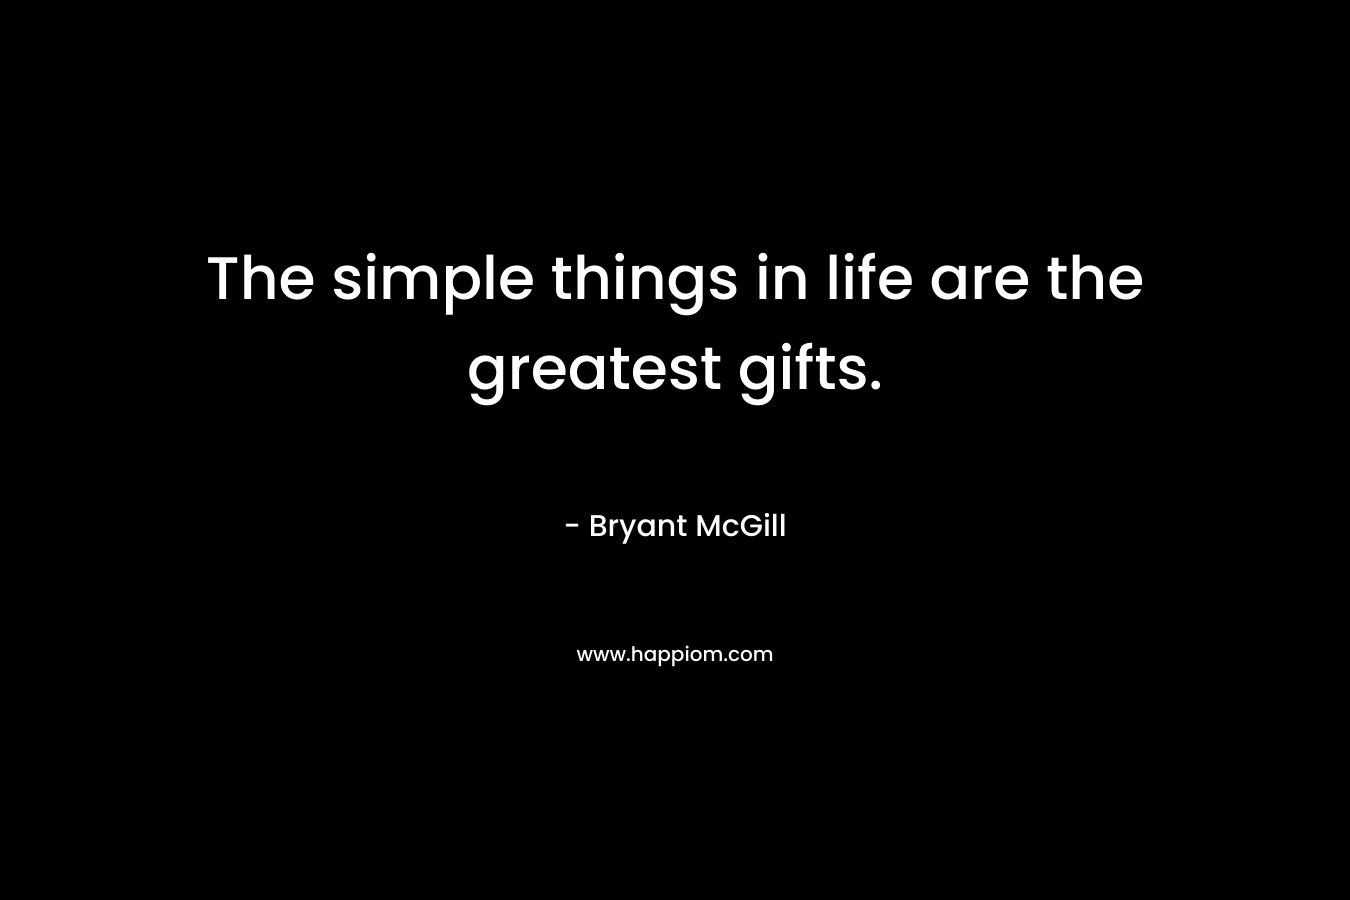 The simple things in life are the greatest gifts.